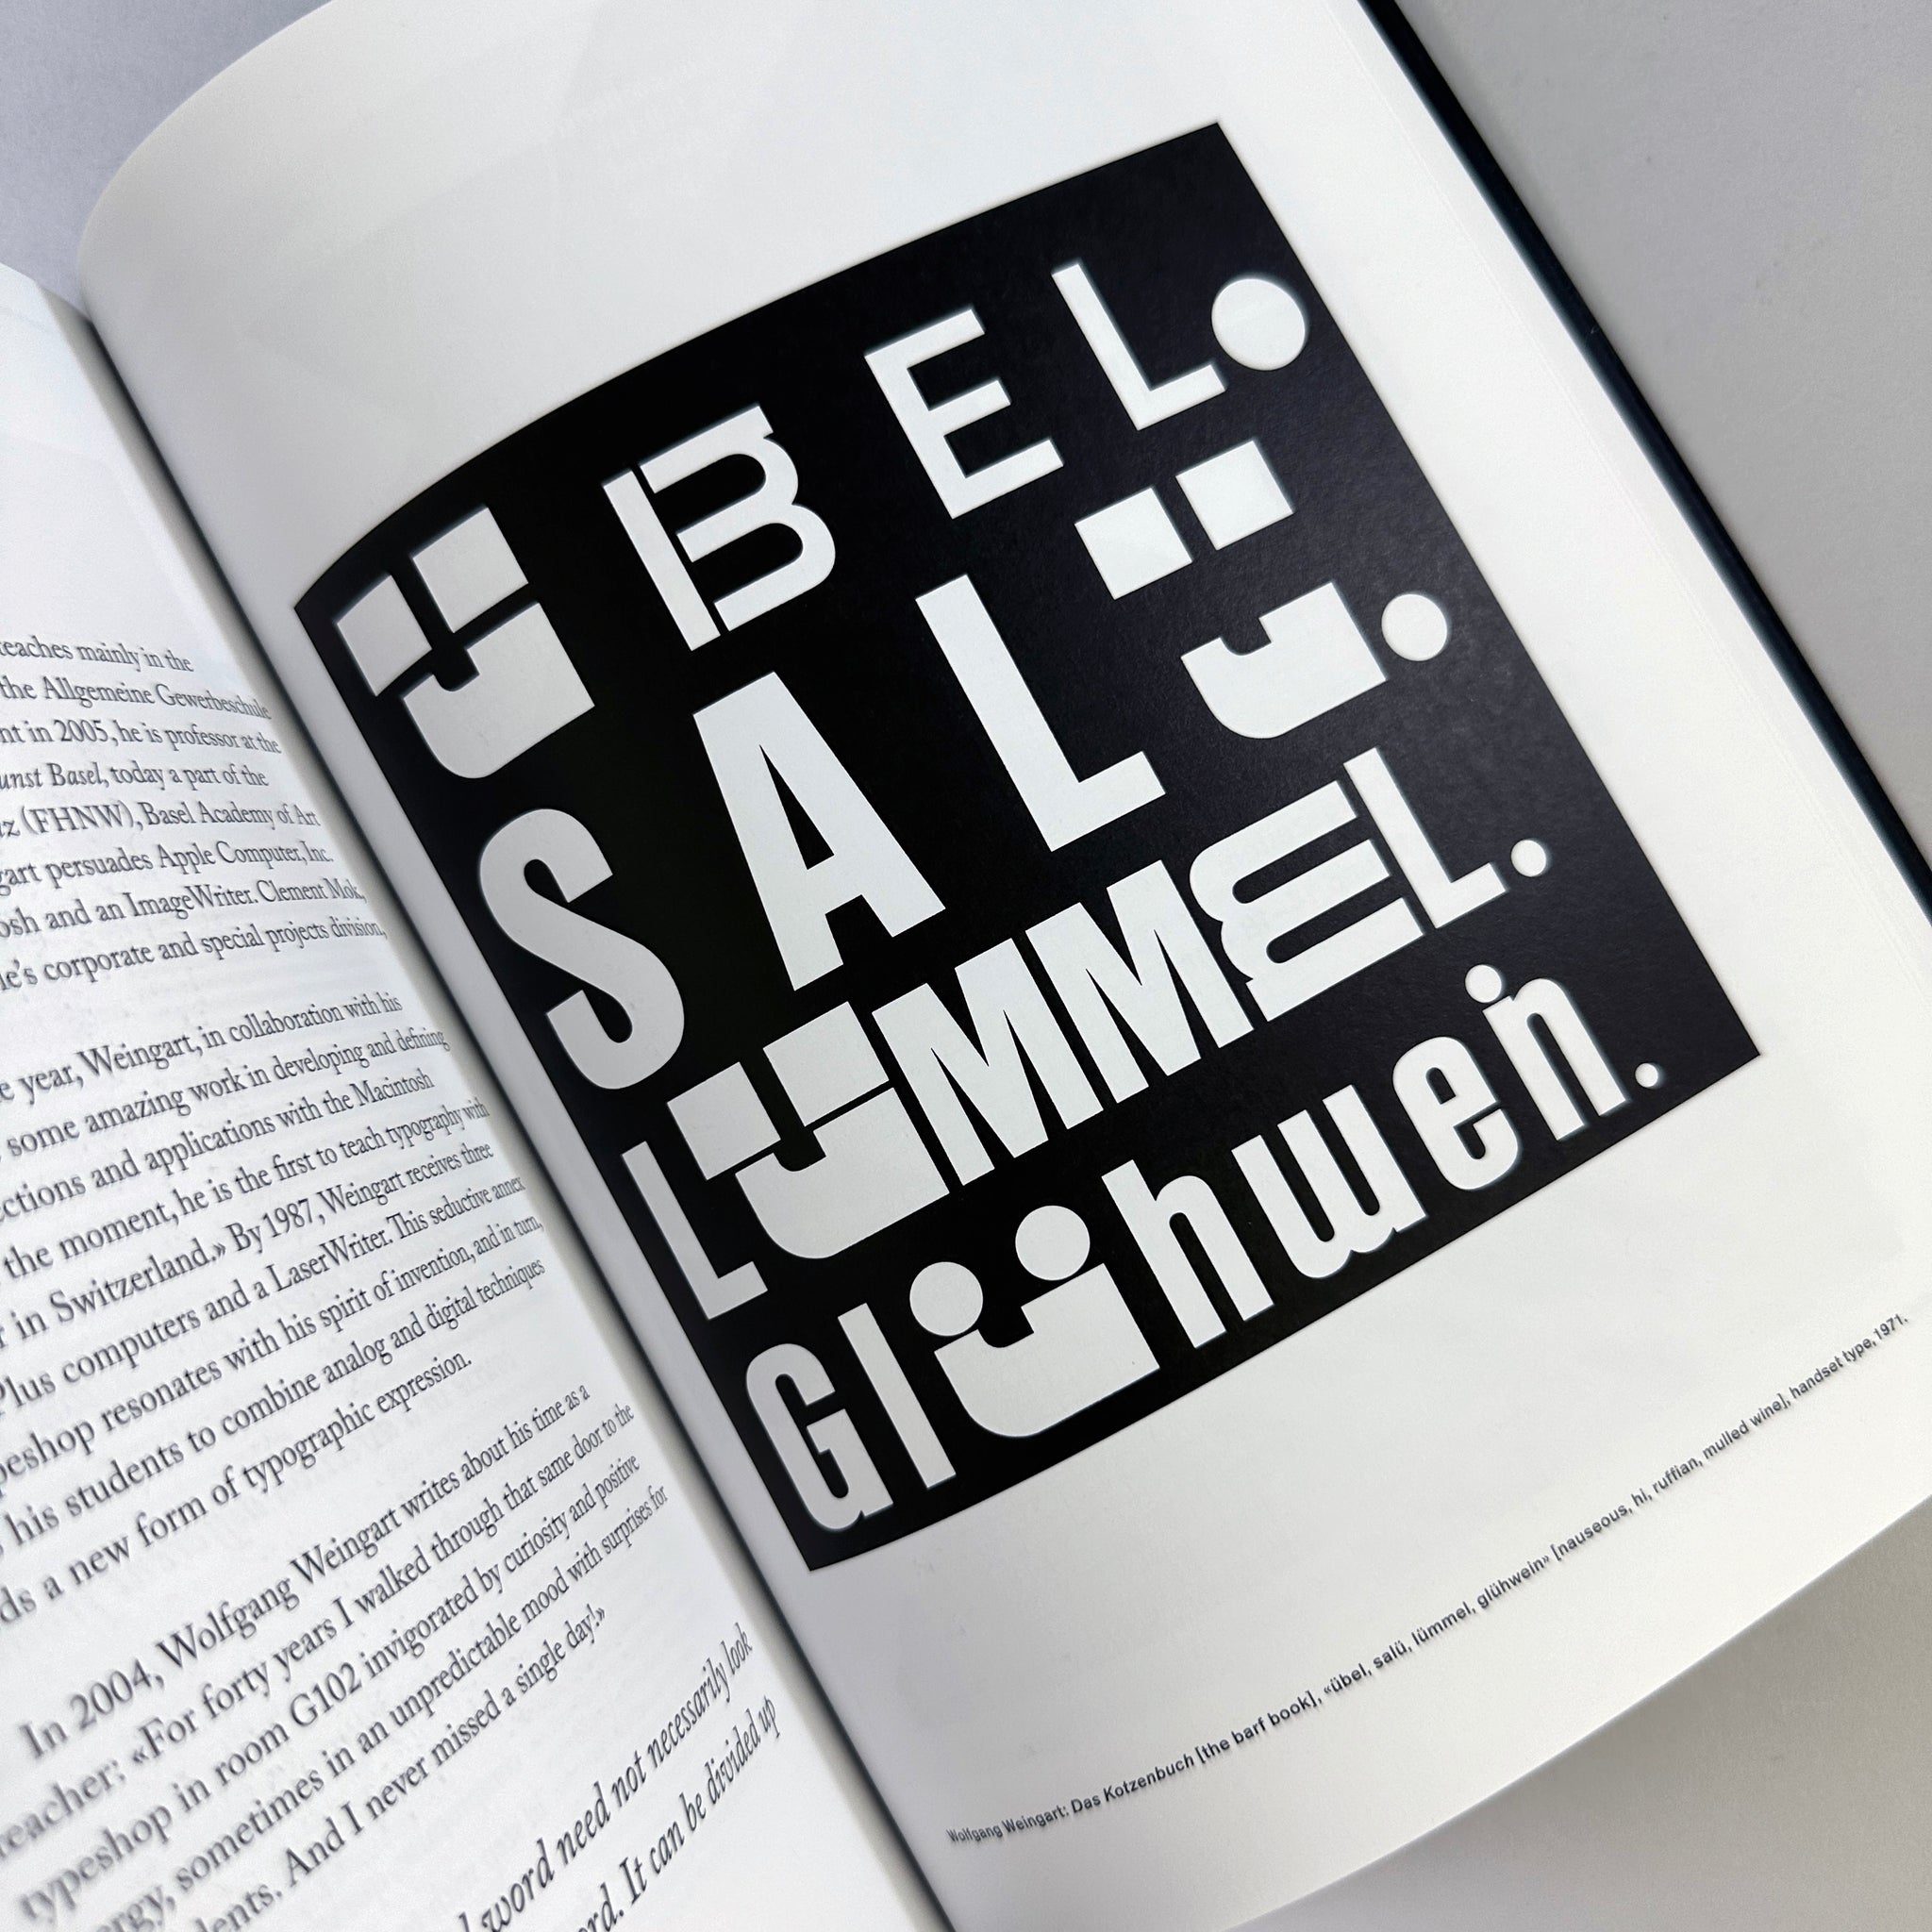 The Birth of a Style: The Influence of the Basel Educational Model on Swiss Graphic Design